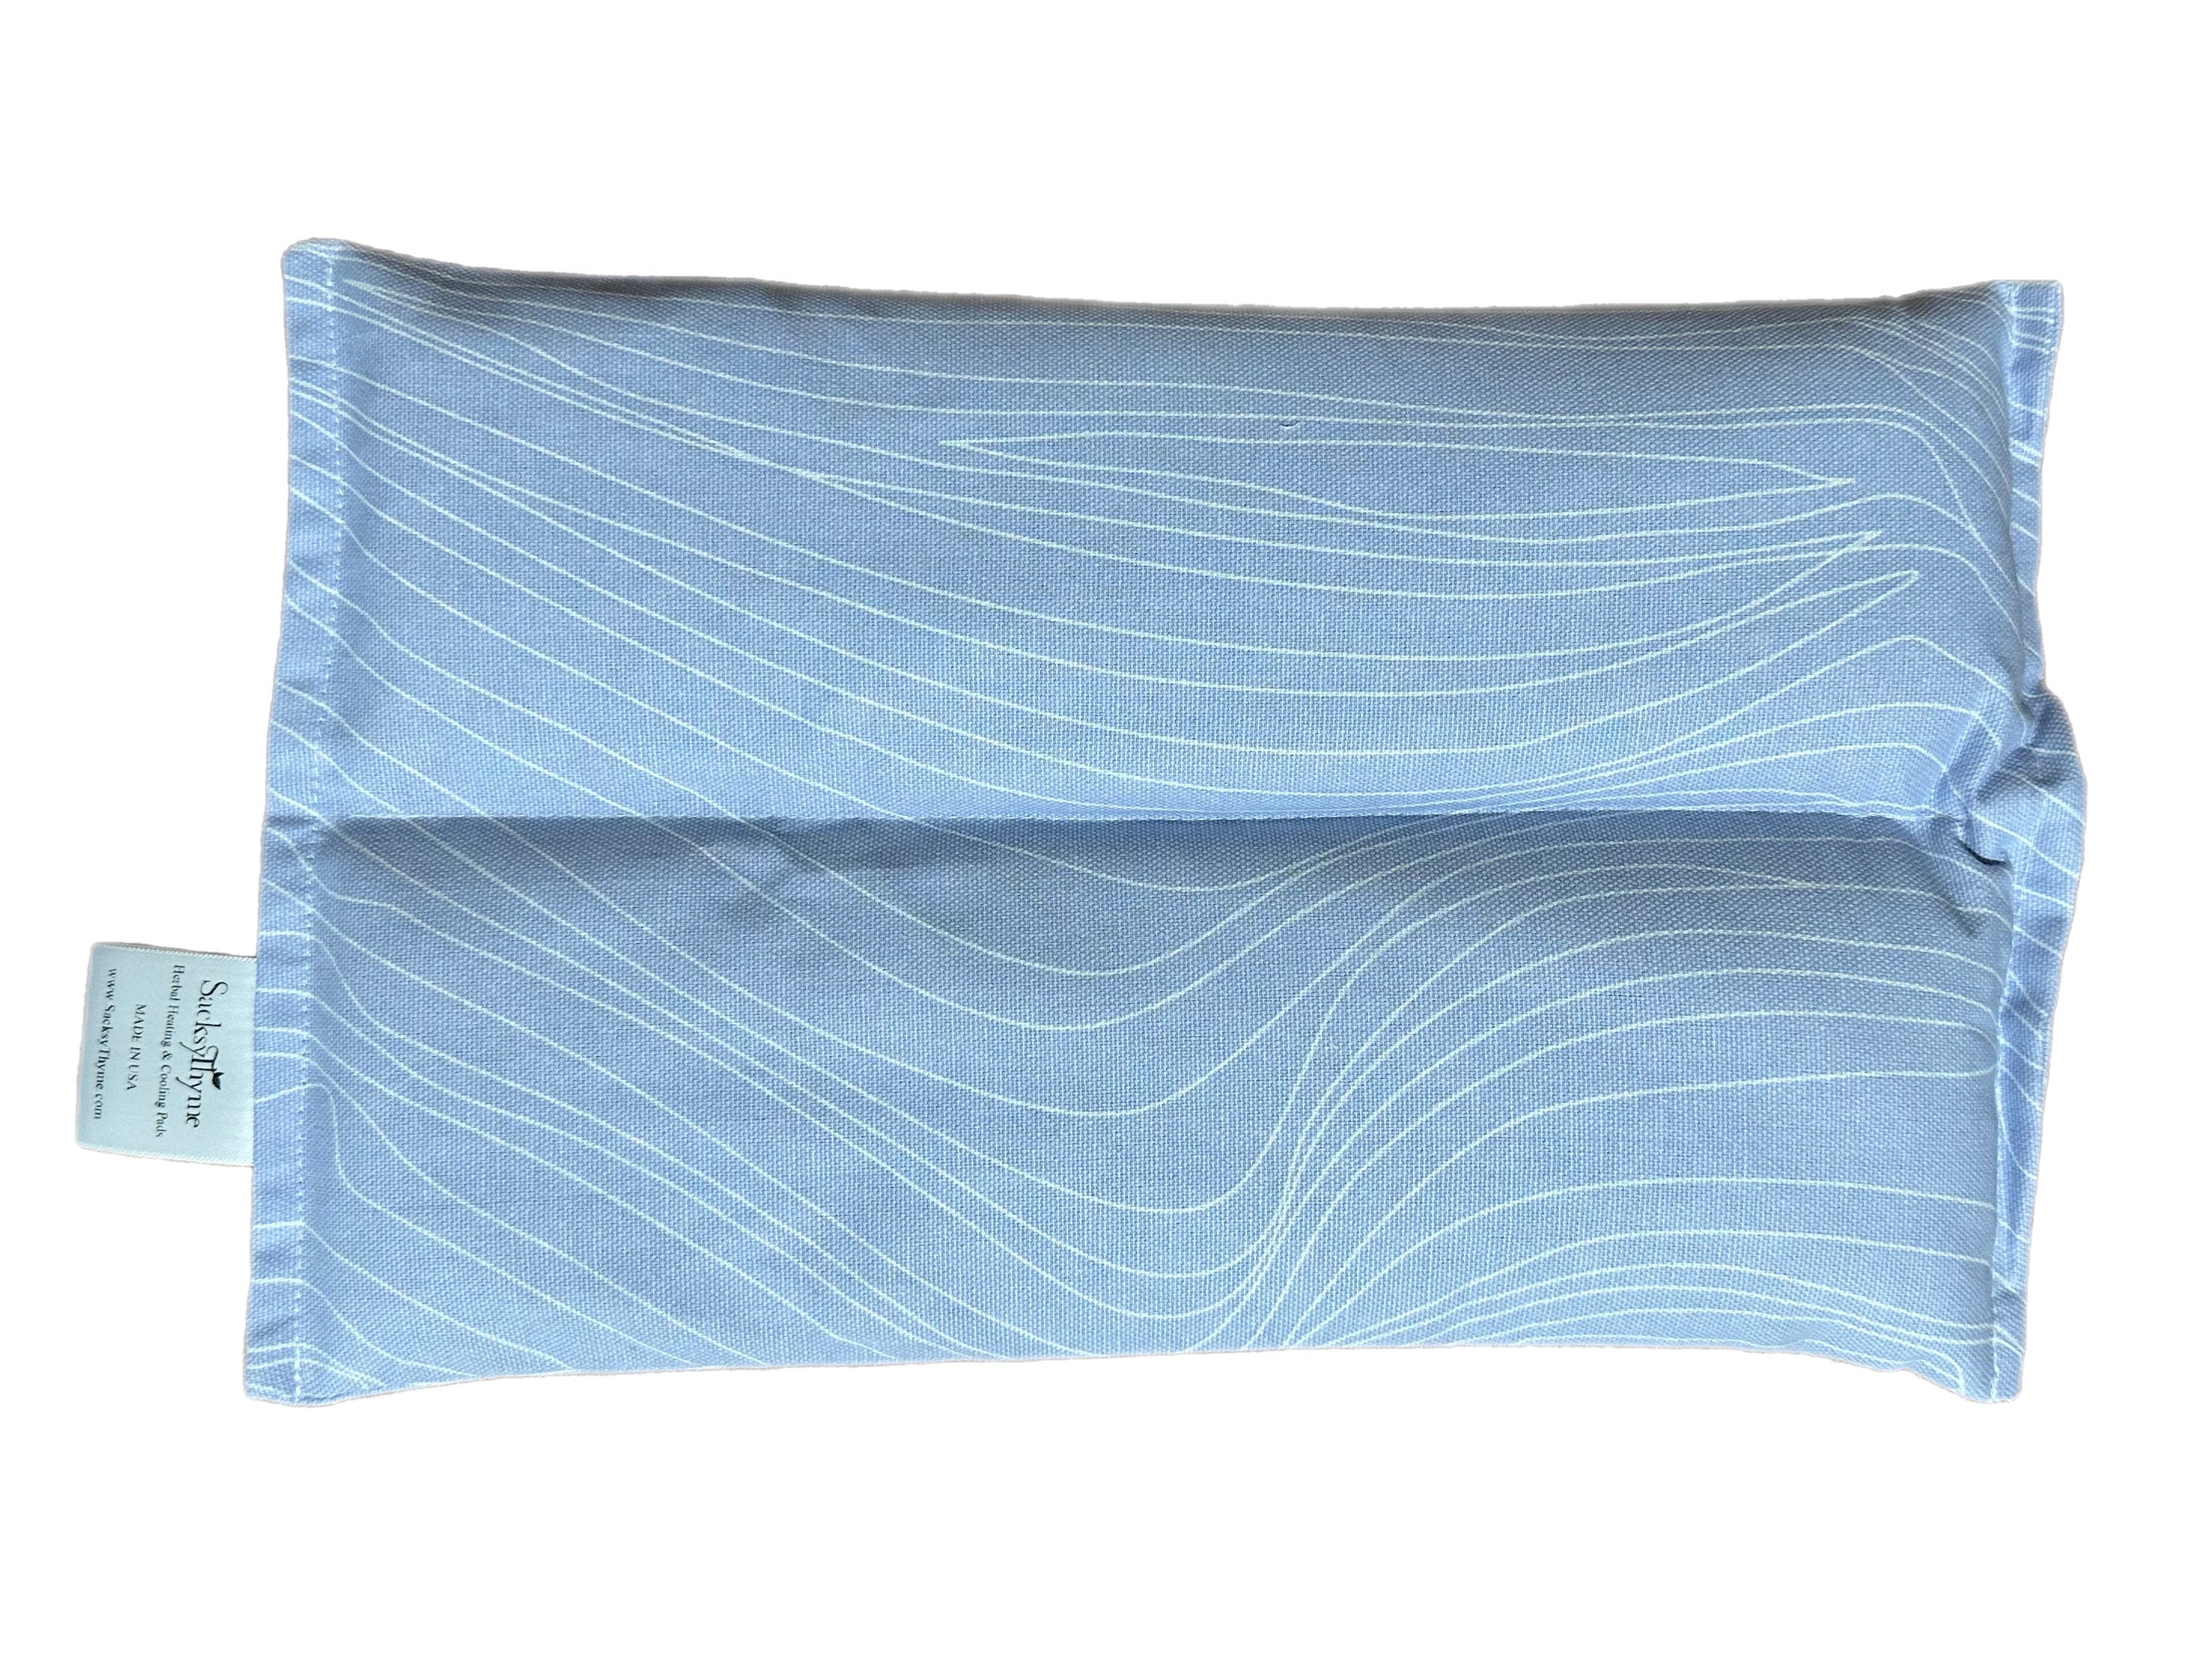 The Original Sack hot and cold therapy Microwavable pad